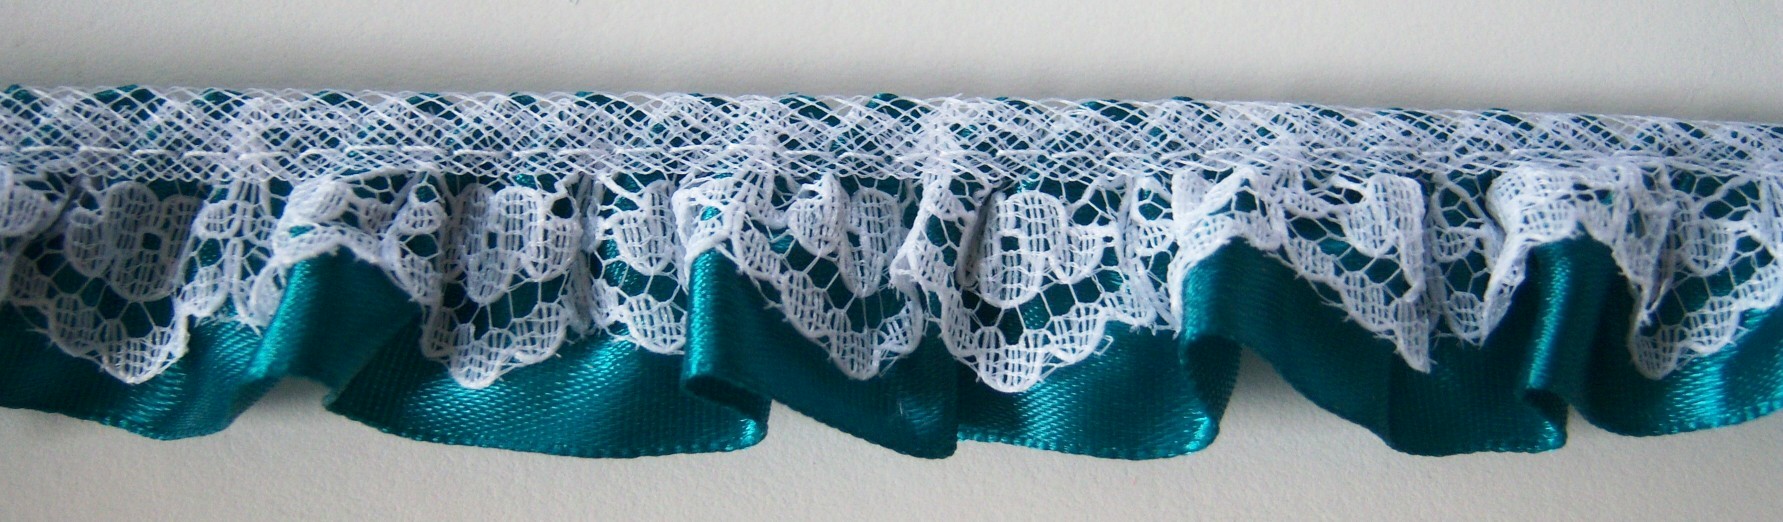 White Lace/Teal Satin Ruffled